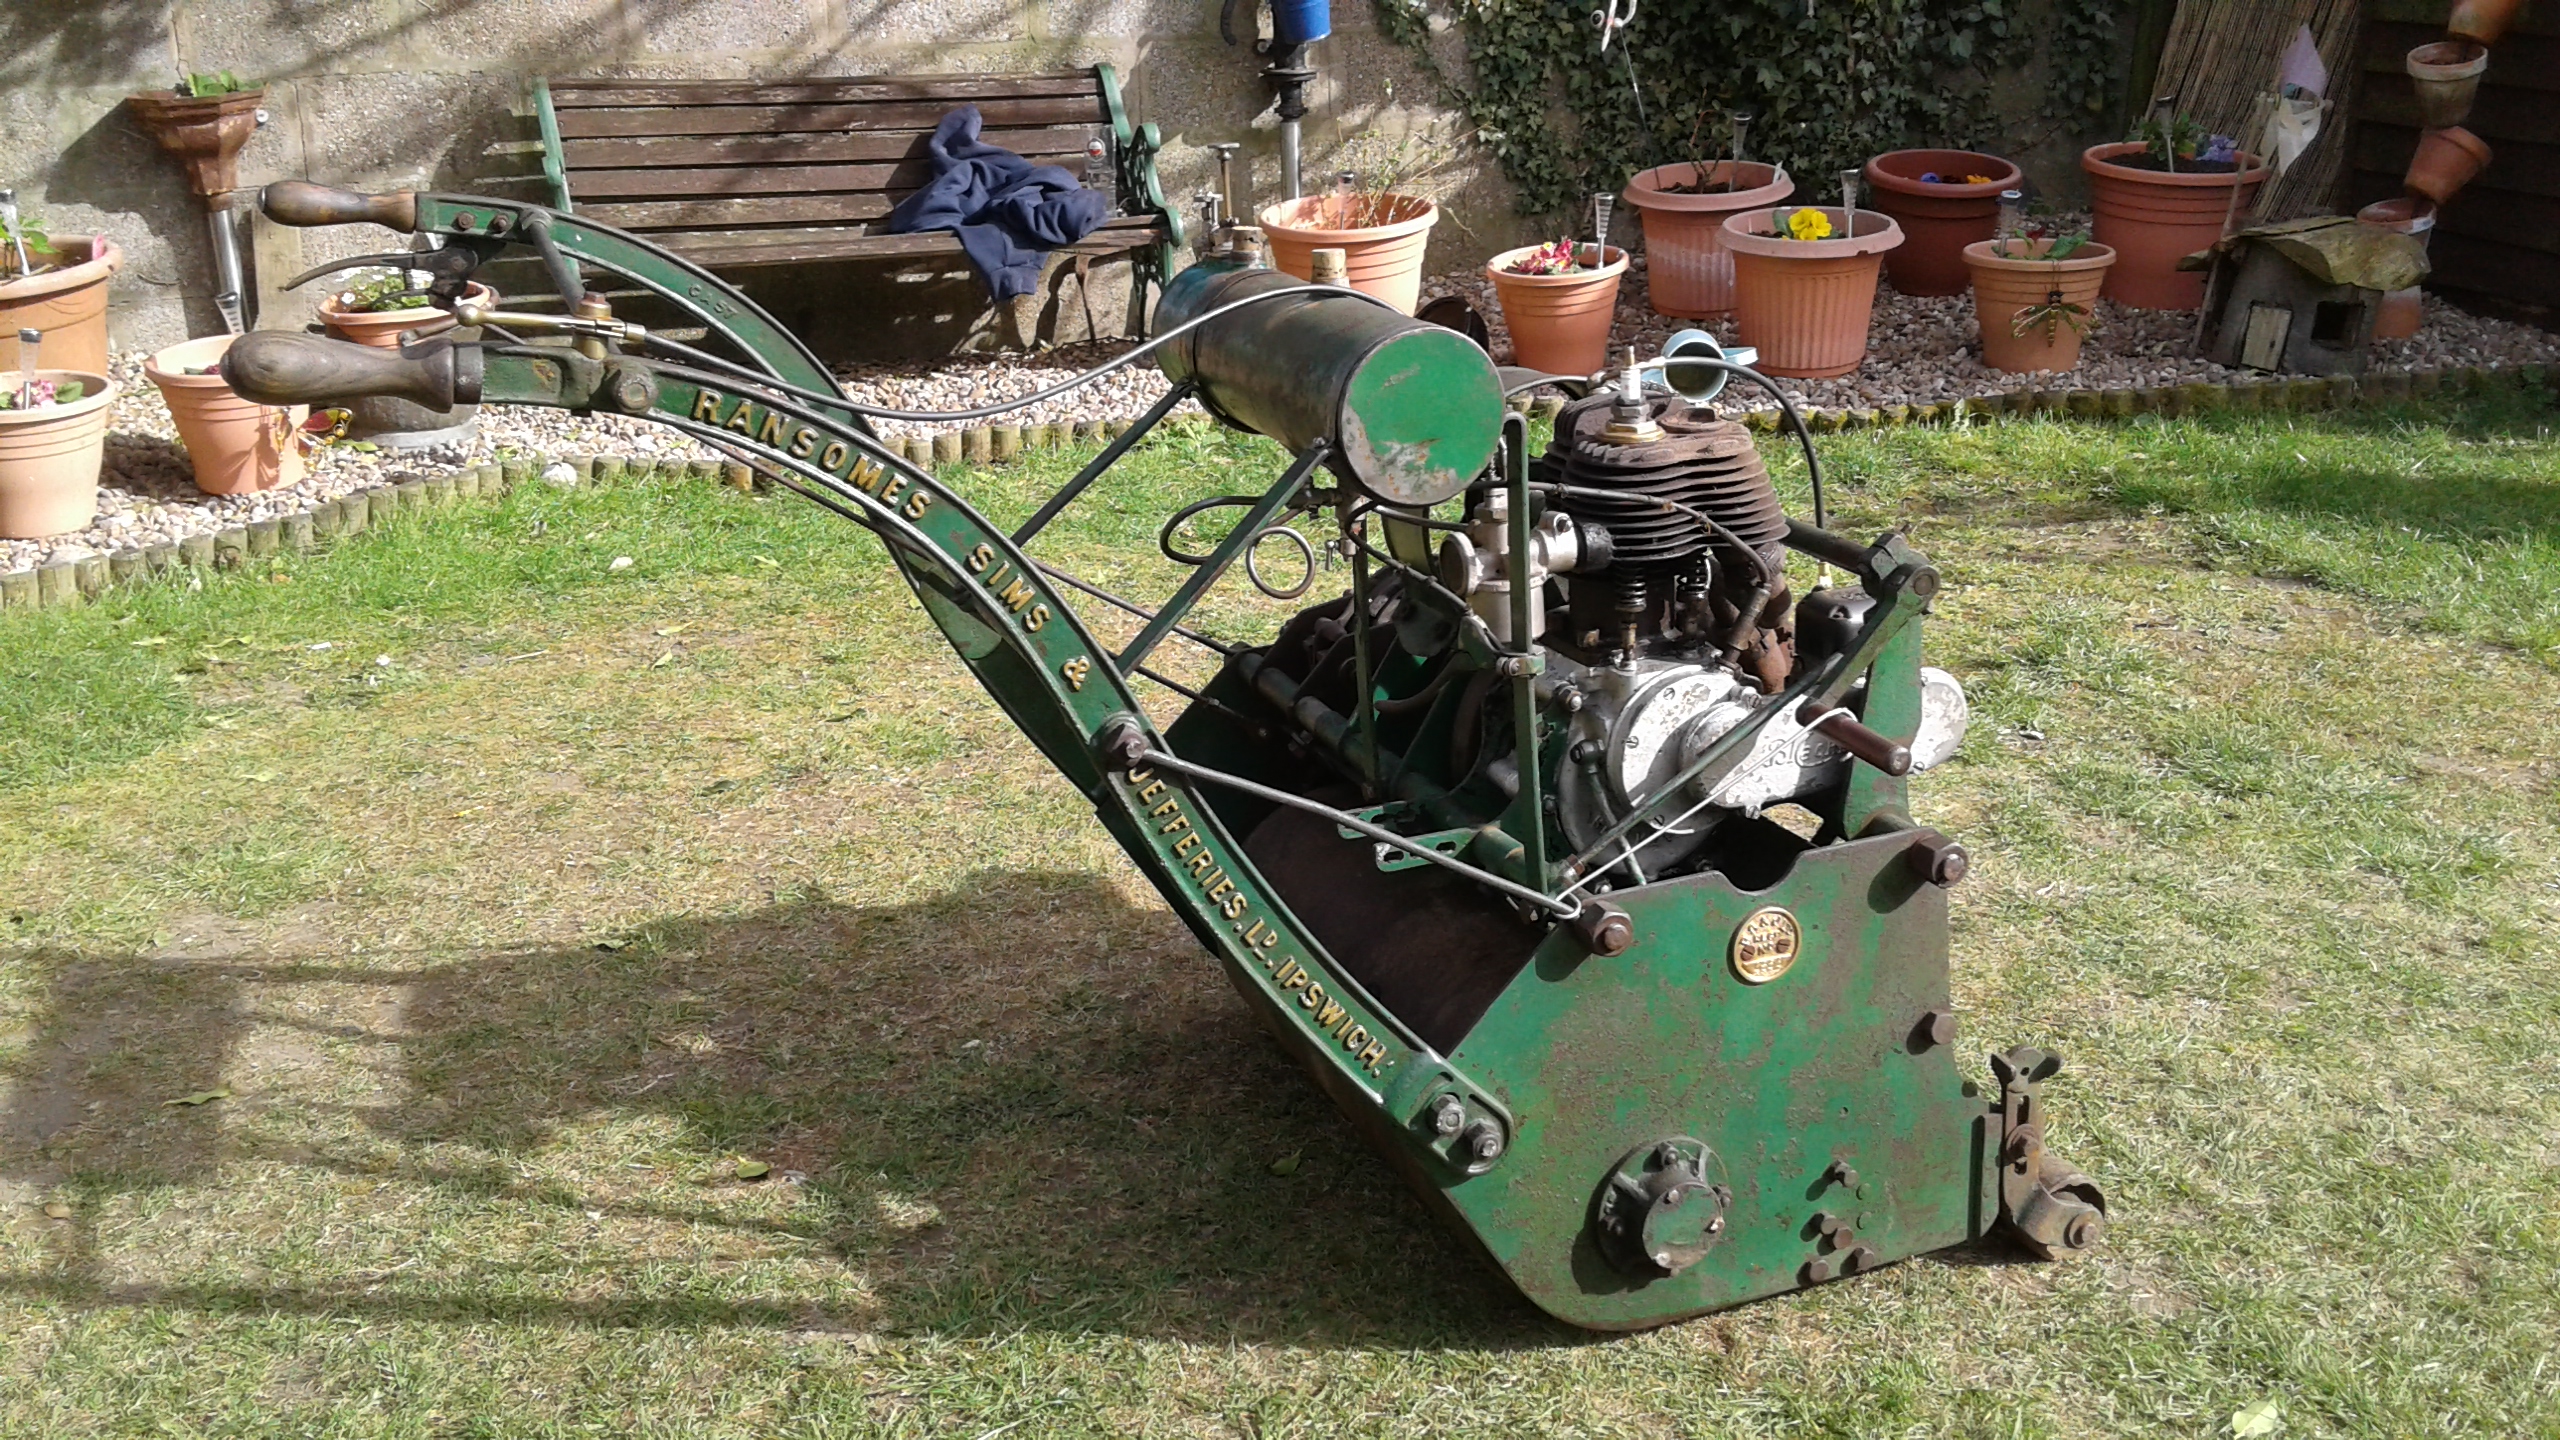 Ransomes mk4 24" | The Old Lawnmower Club